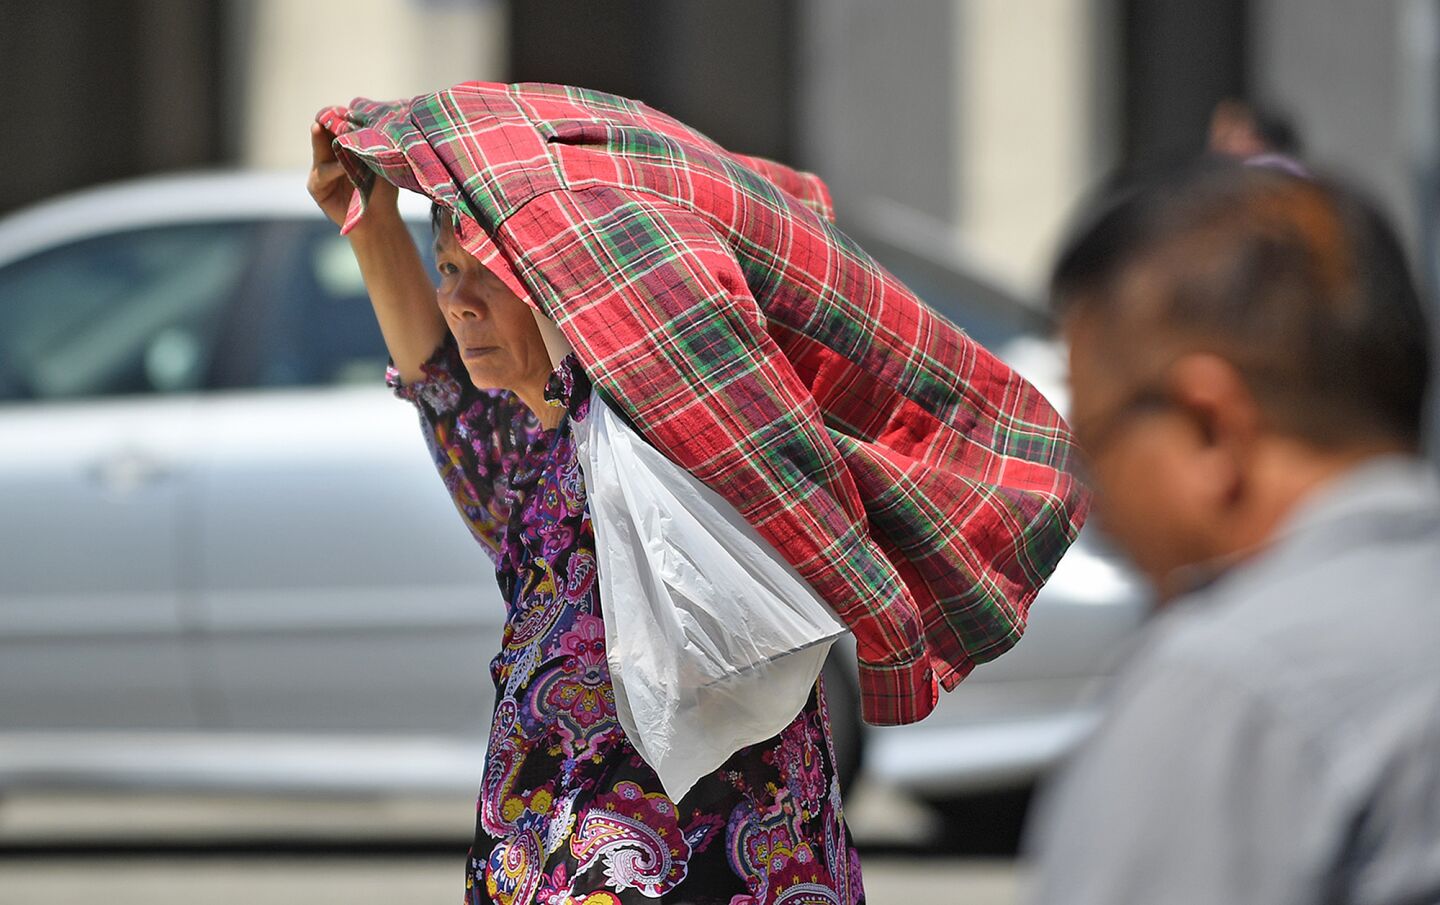 A woman shields herself from the hot sun in 91 degree weather in Chinatown.